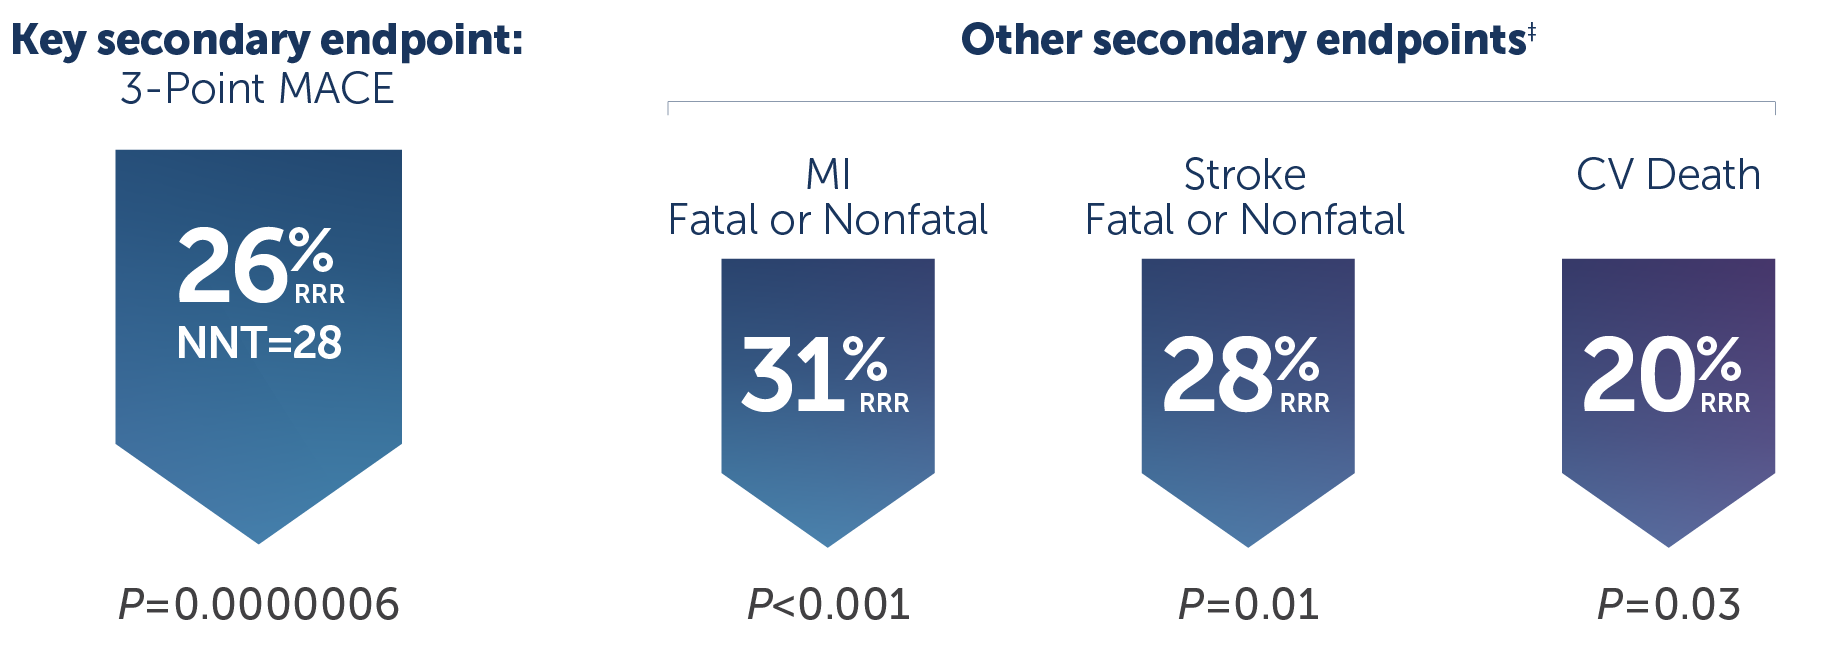 Significantly reduced the risk of MI, stroke, or CV death